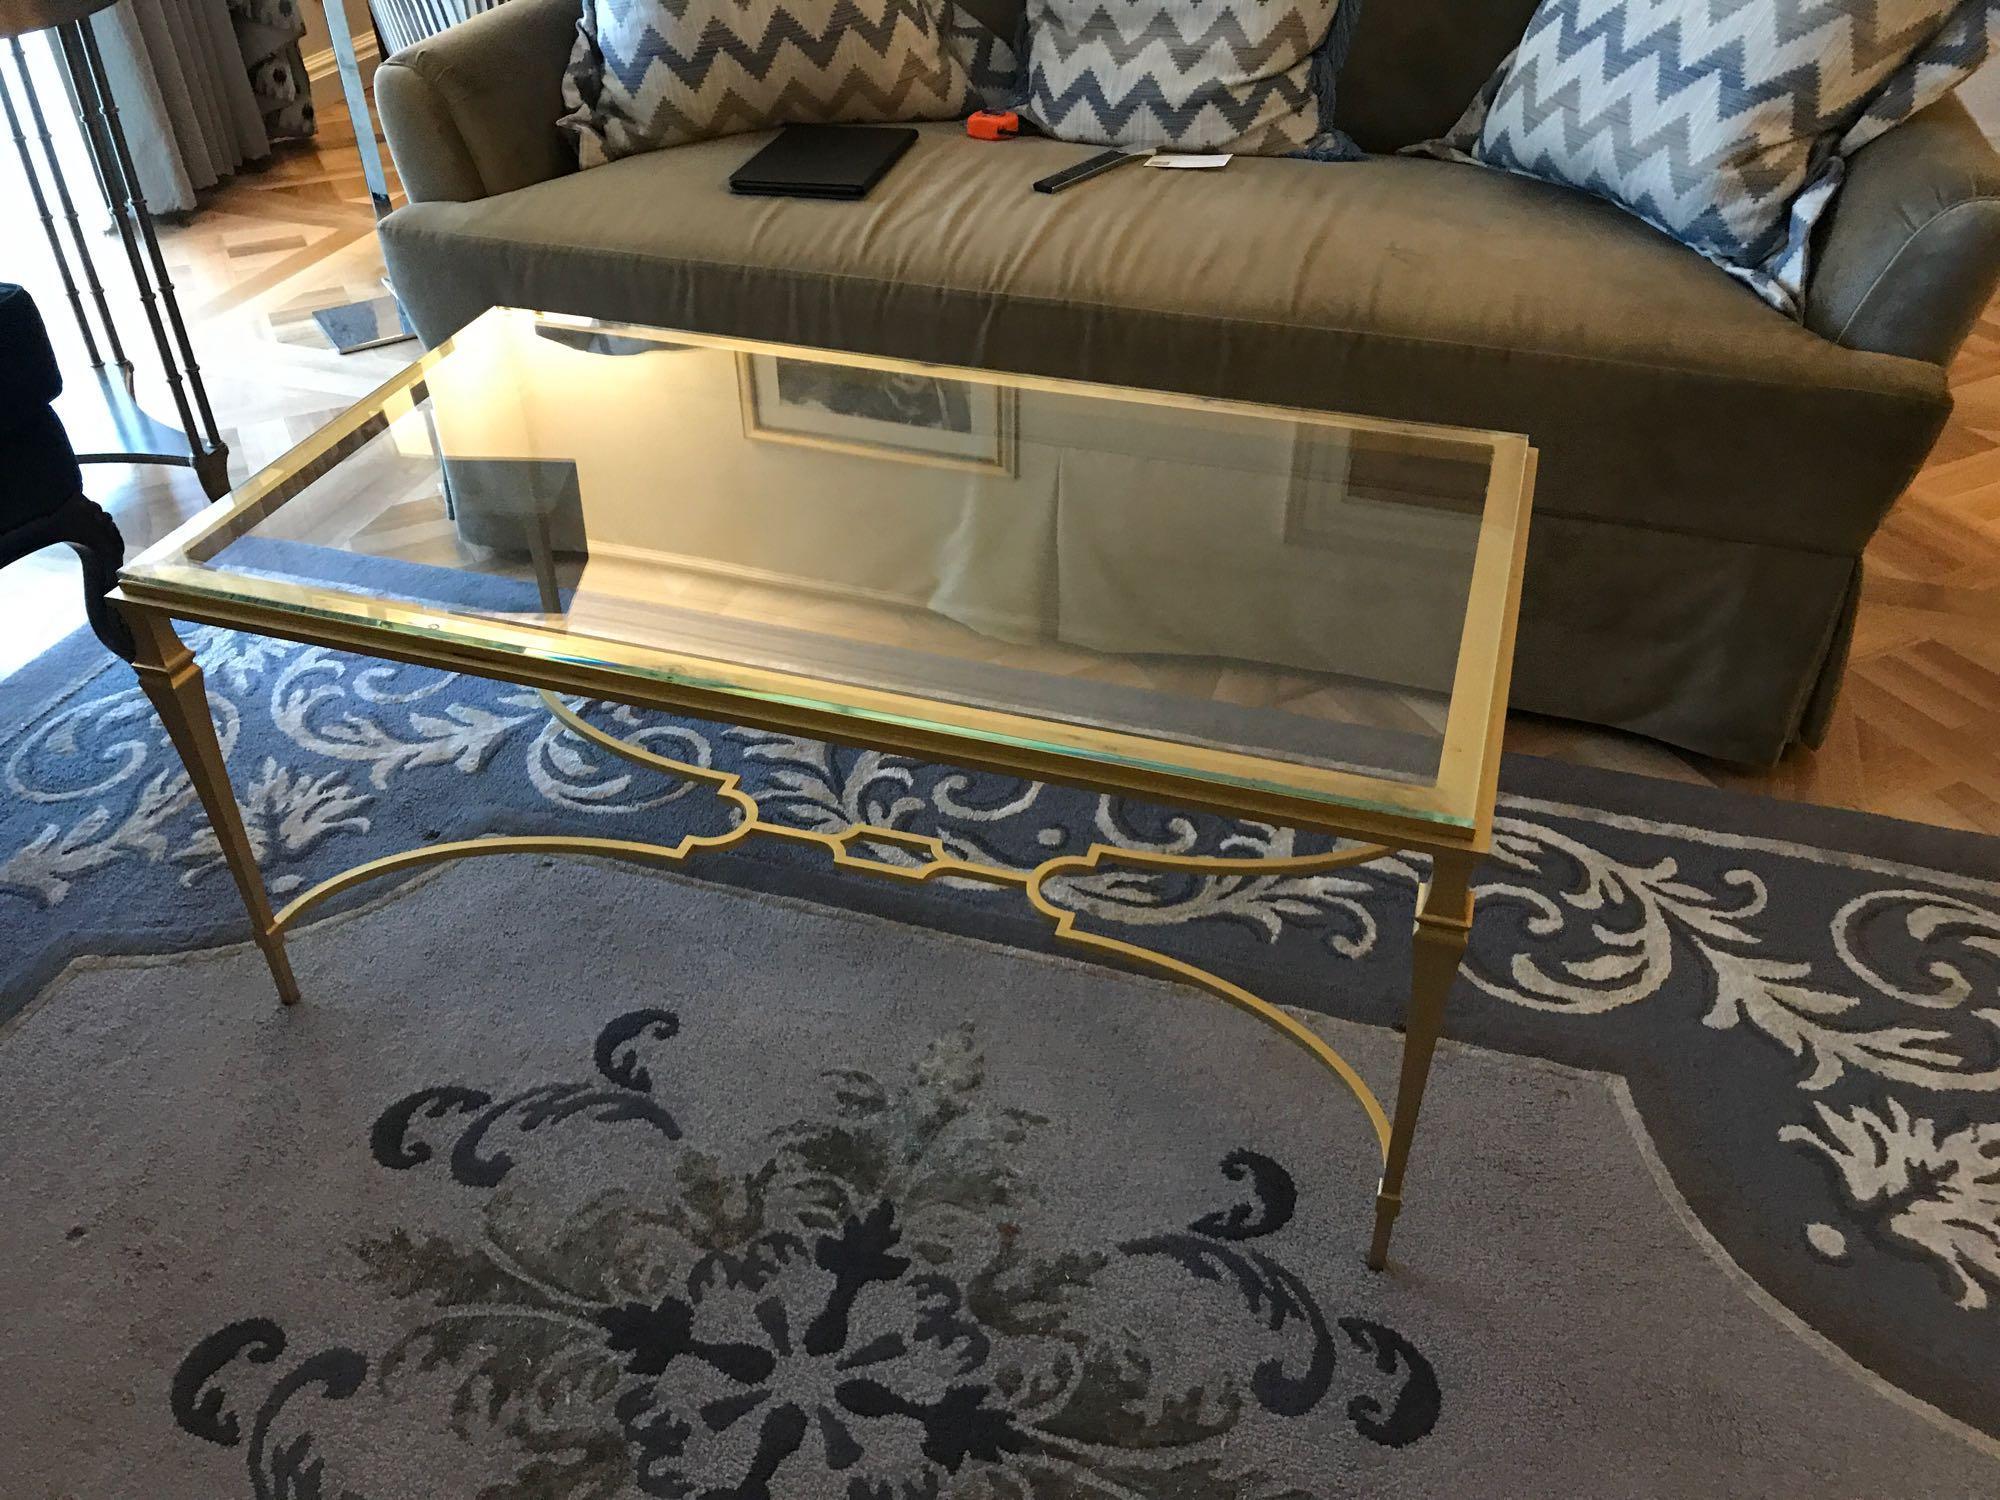 A Rectangular Coffee Table Polished Brass Frame With Clear Glass Top 110 x 60 x 58cm Room 604 - Image 2 of 2